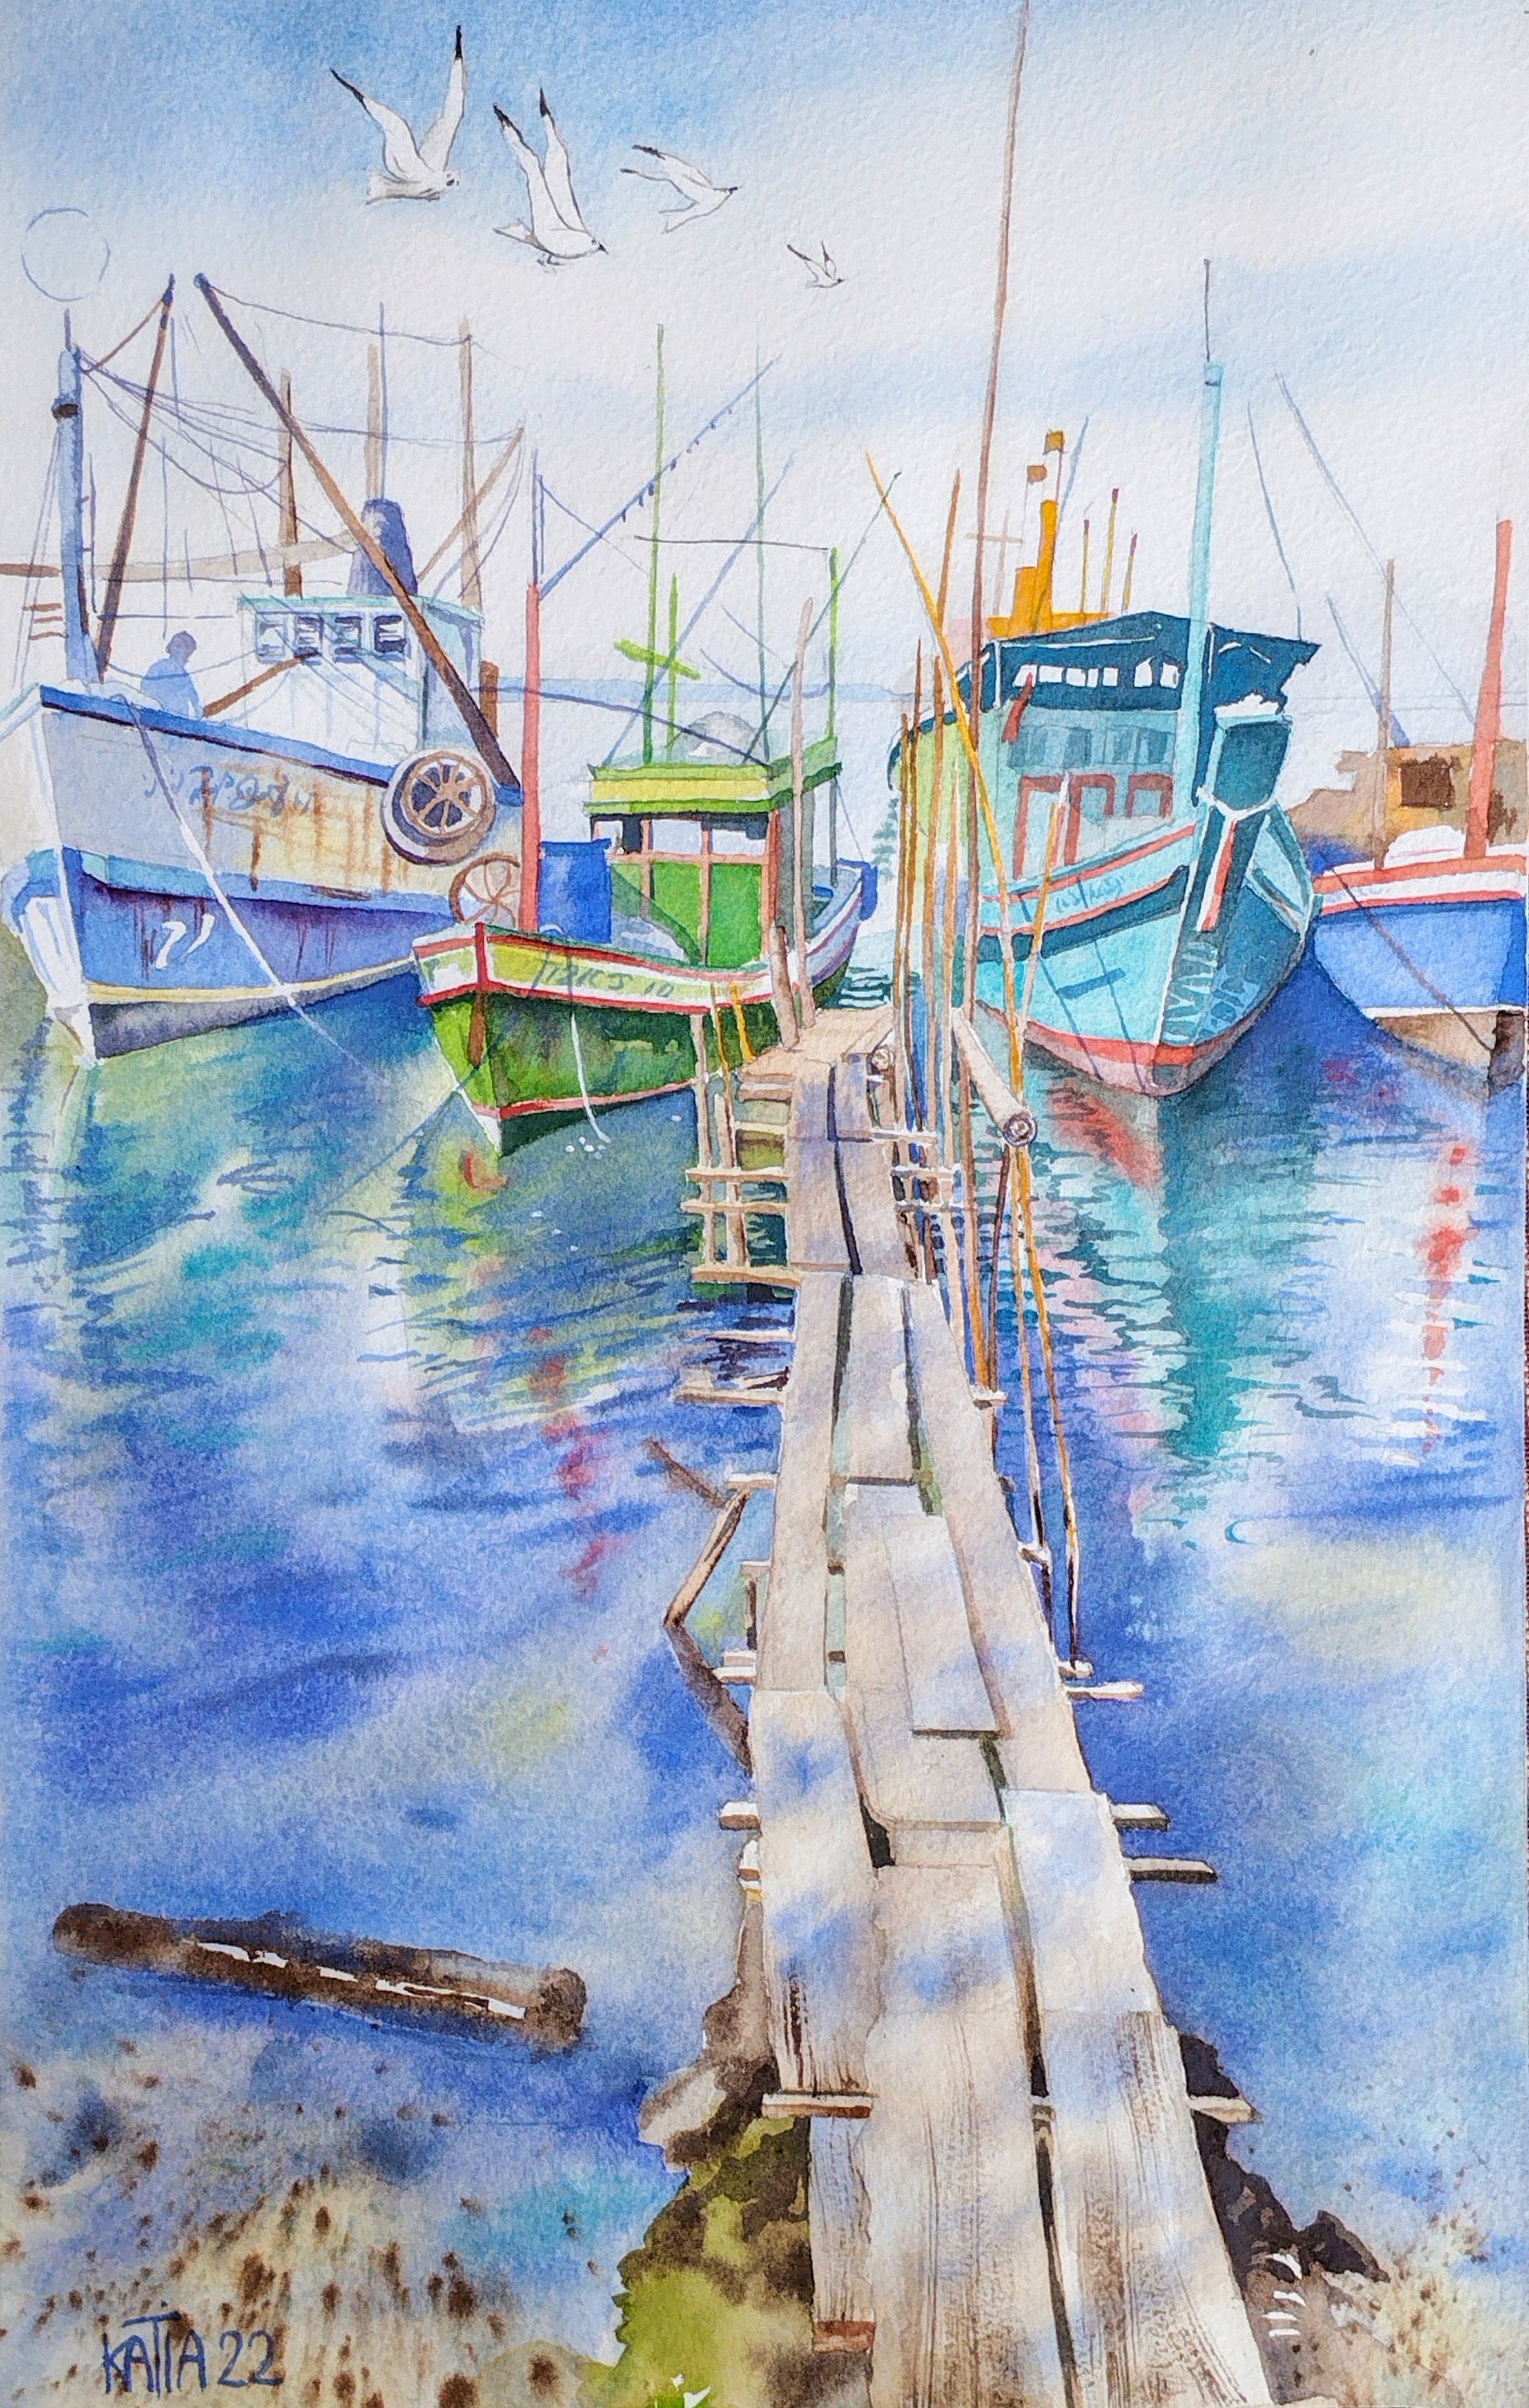 Painting of Fishing Boats, Trawlers Near the Pontoon, Original Watercolor,  Handmade, Seascape, Wall Decoration of Boats. 